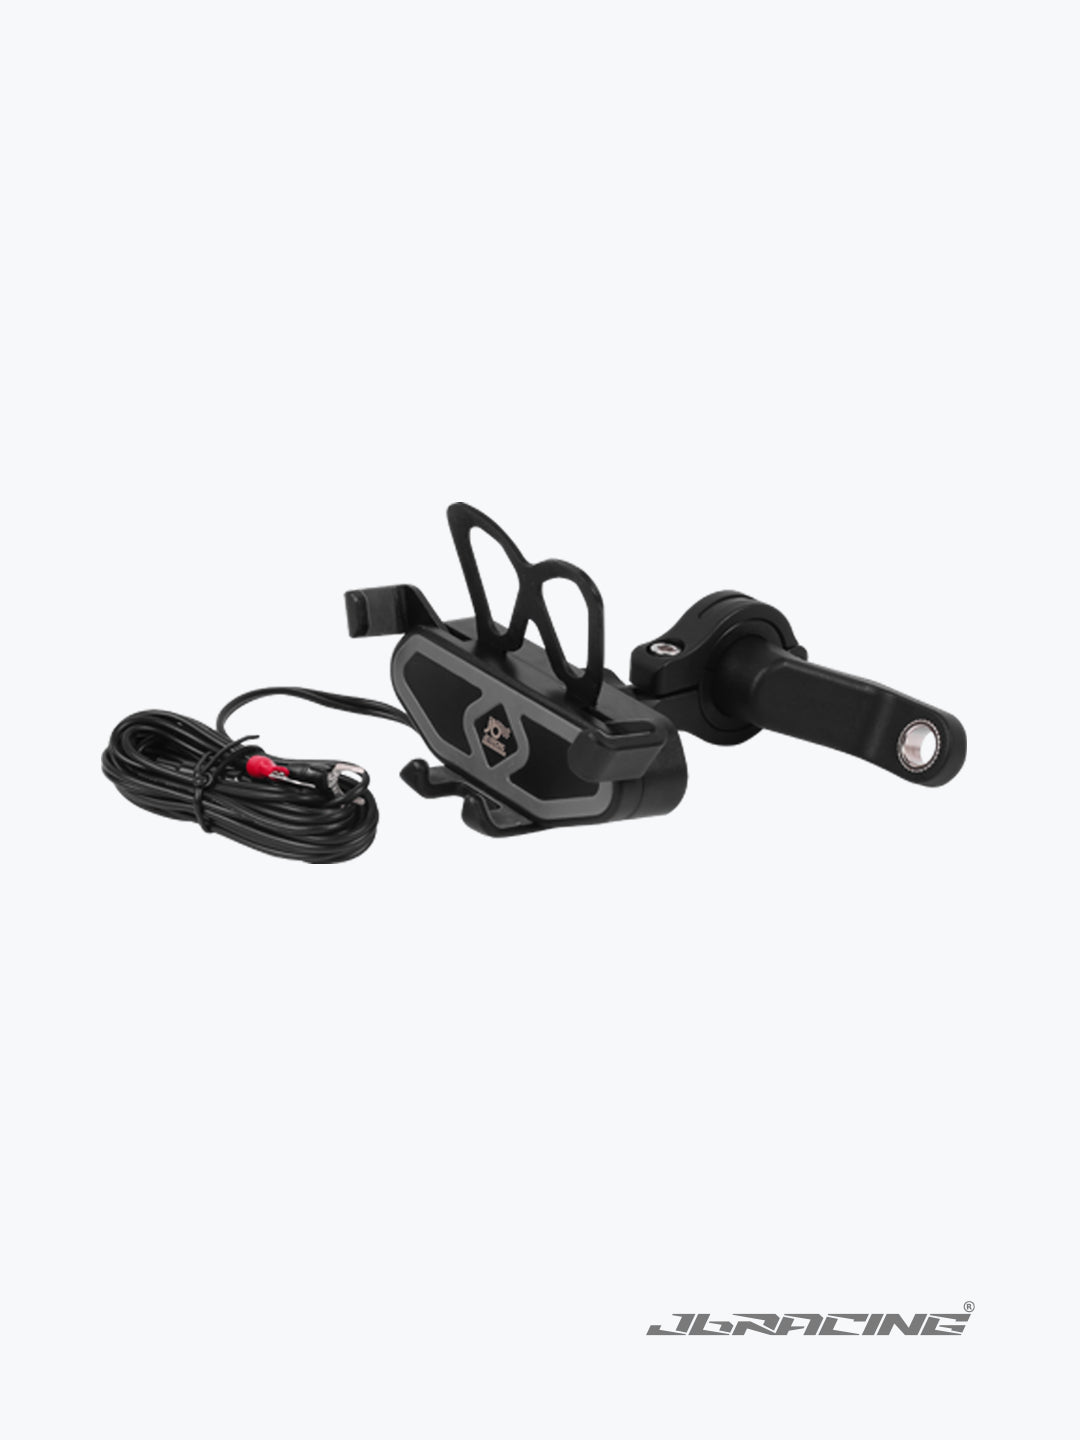 JB Racing M10 Mobile Holder With USB Charger